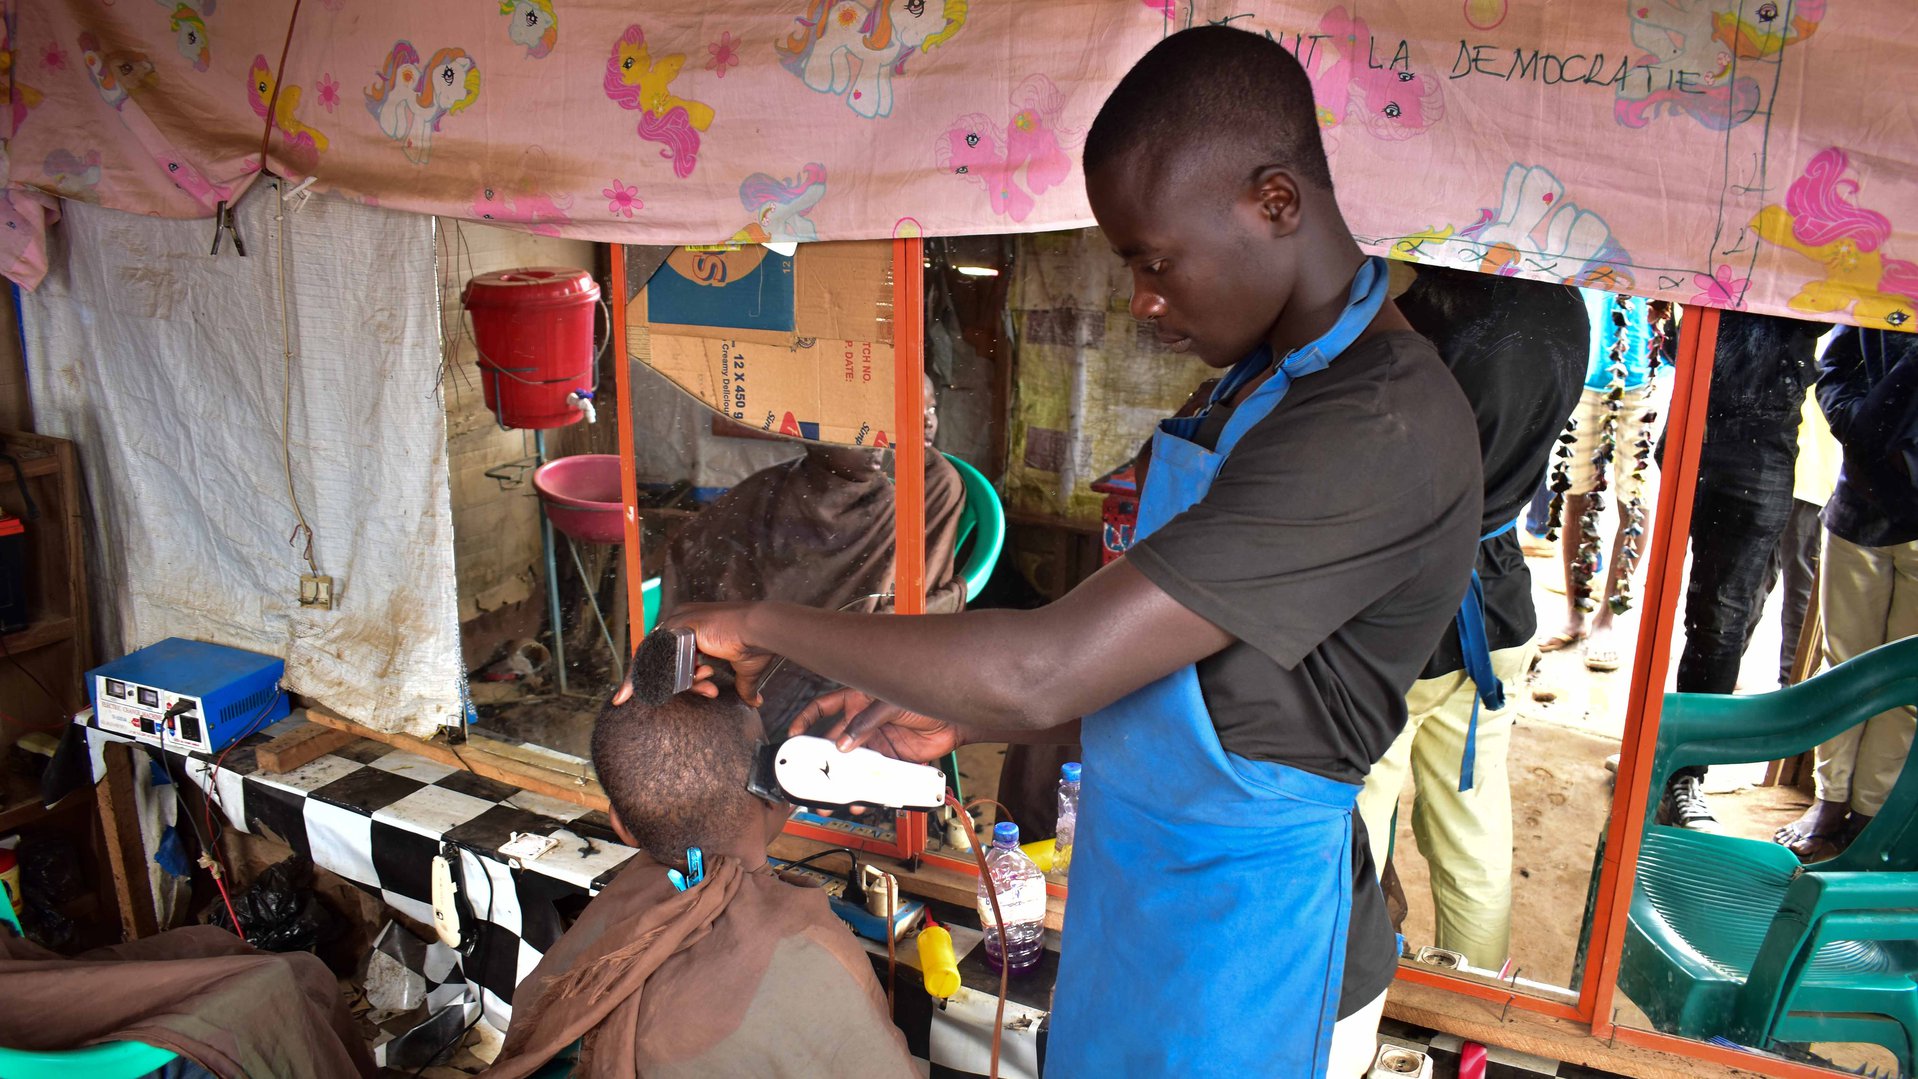 War child's entrepreneurial and vocational training helps youth prepare themselves for the labour market